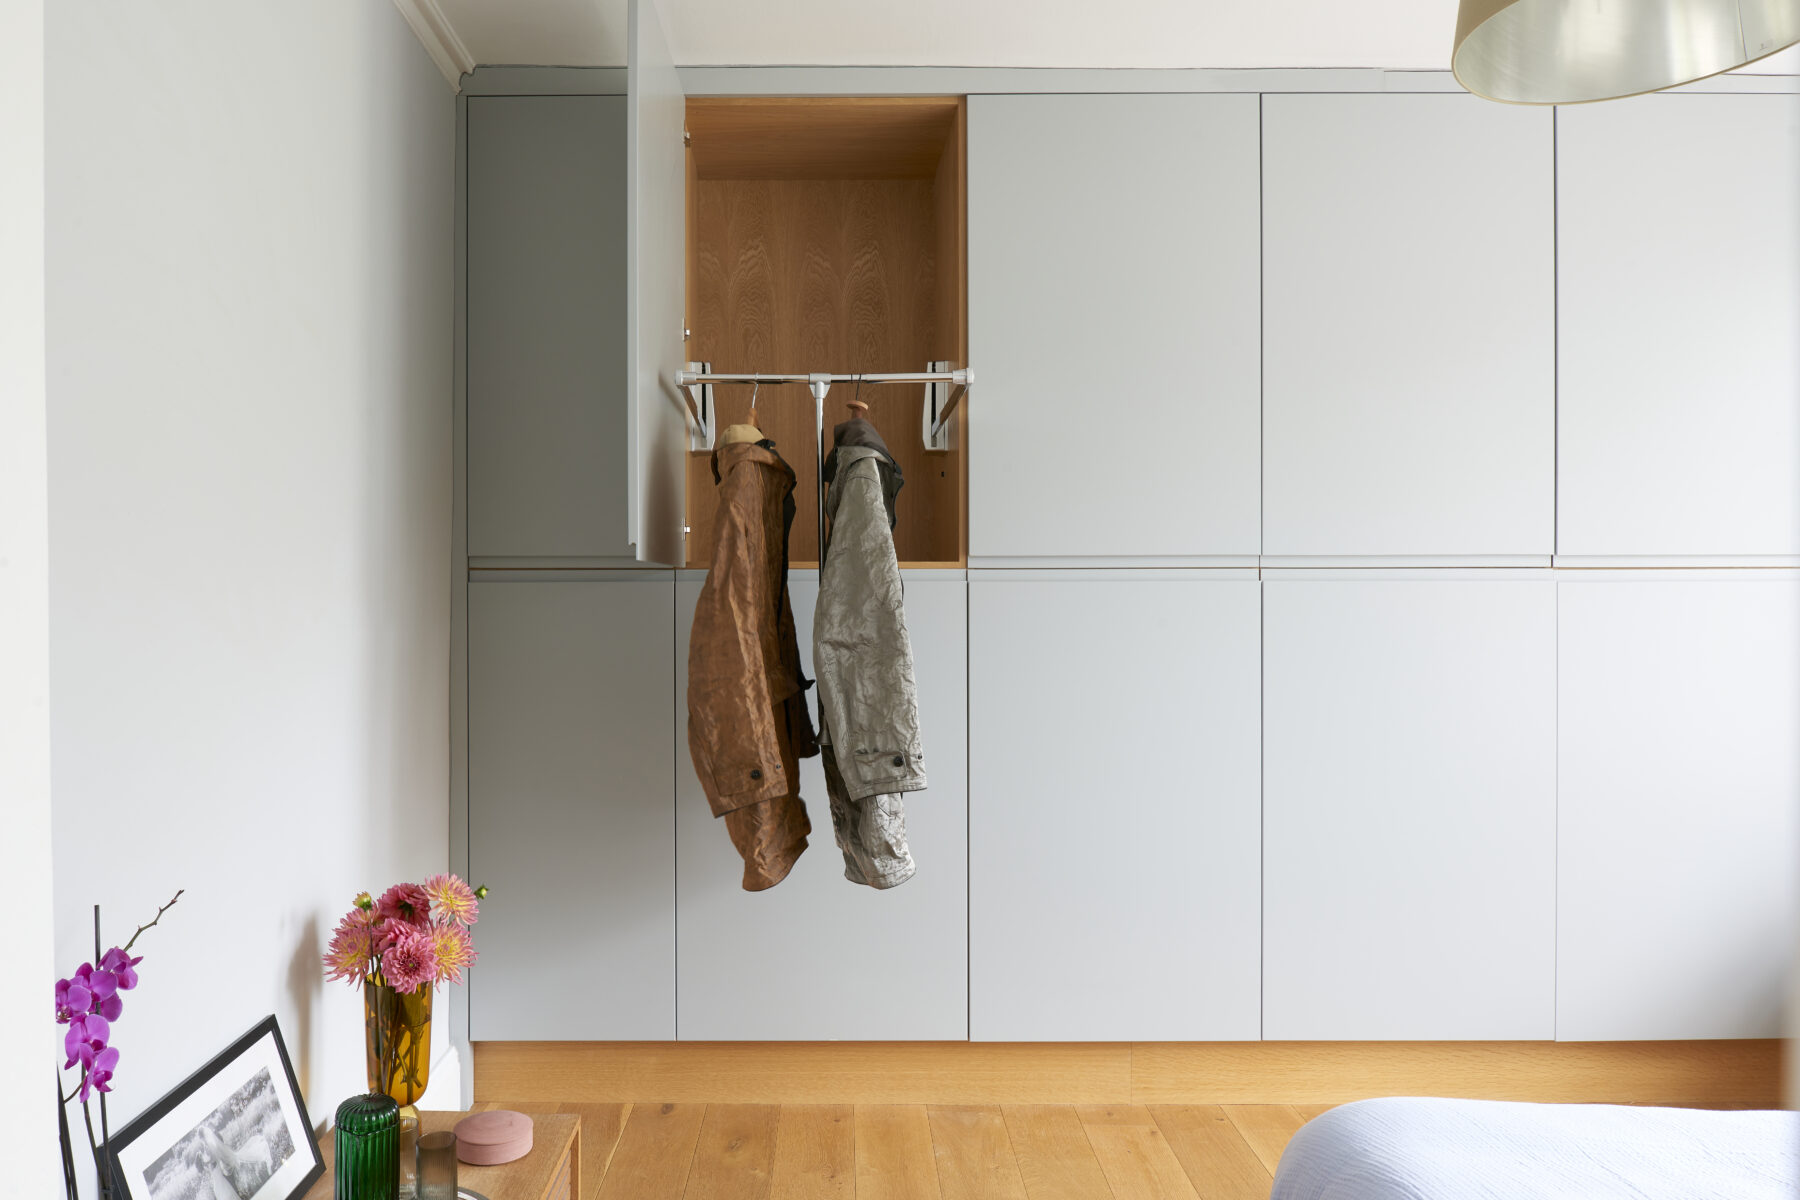 Apartment renovation - fitted wardrobes with sprung clothes rails